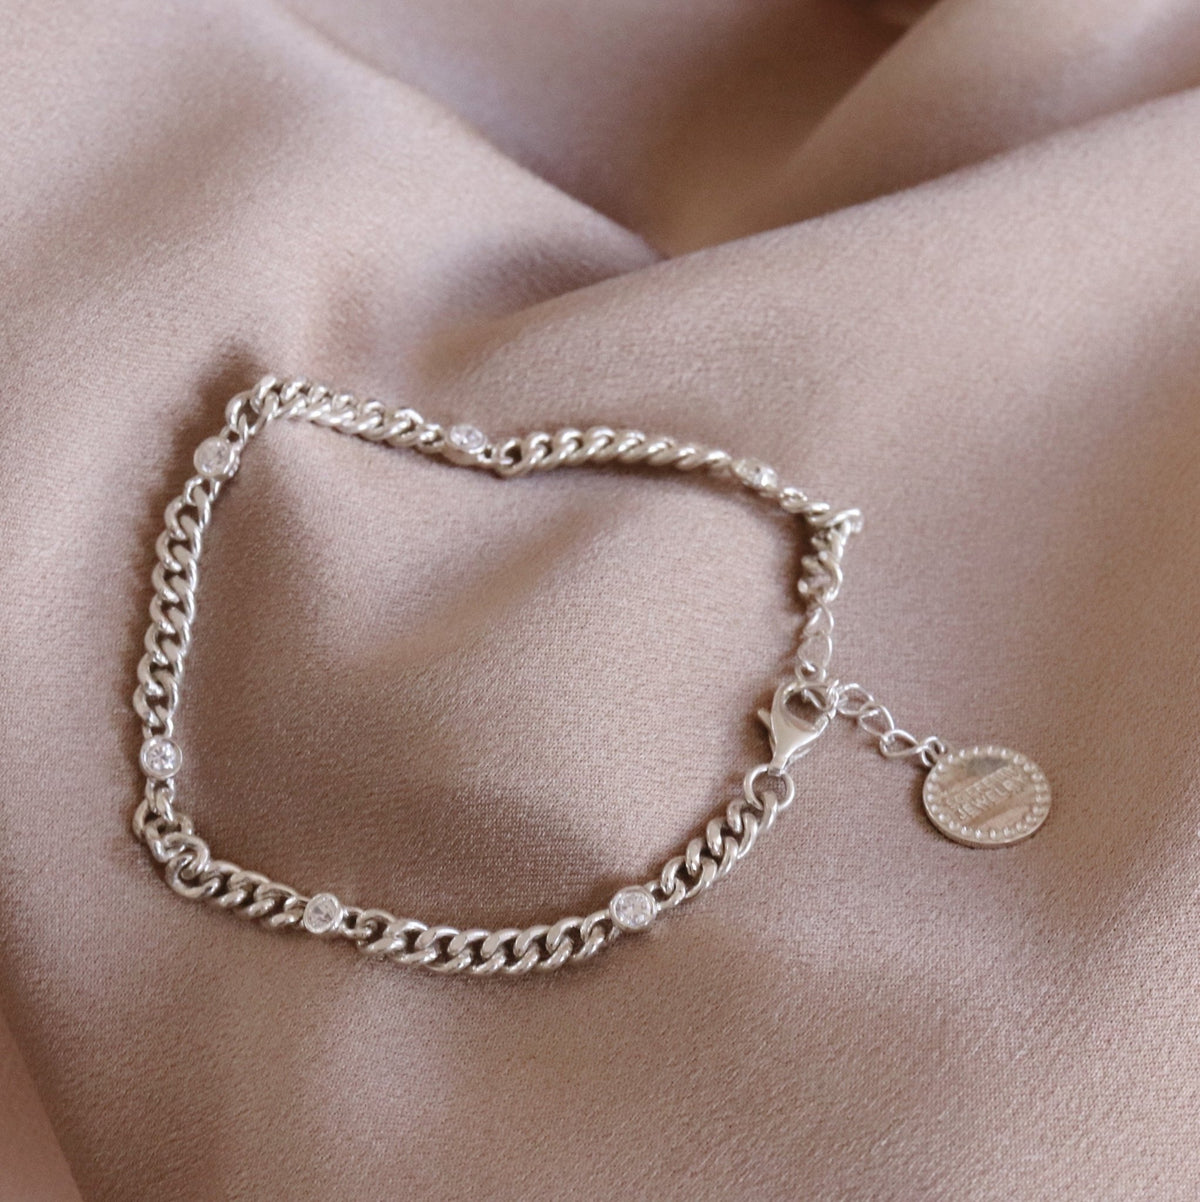 RADIANT CURB CHAIN BRACELET SILVER - SO PRETTY CARA COTTER